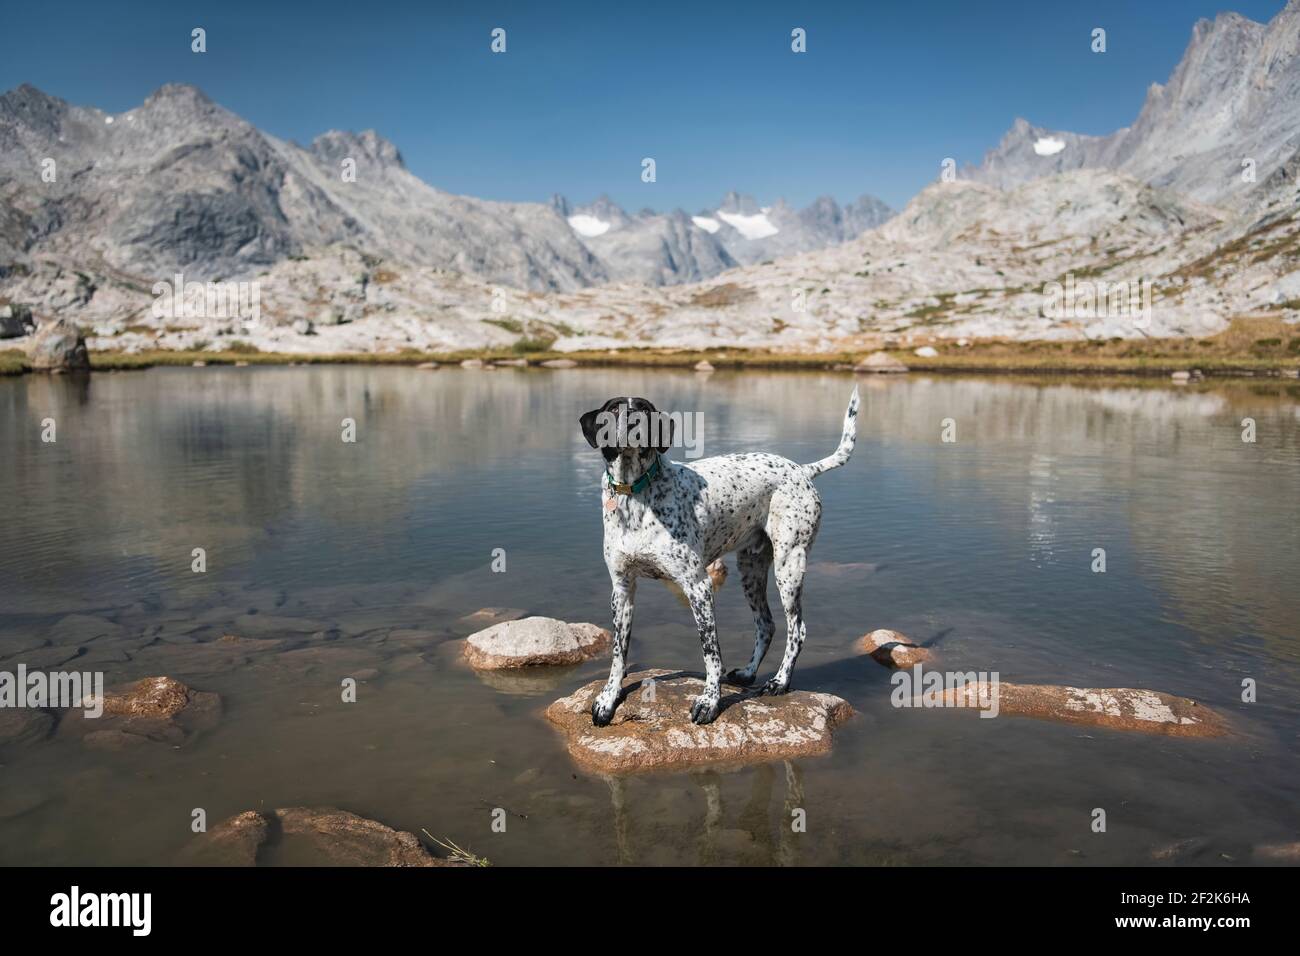 Pointer dog standing on rock in lake against mountains Stock Photo